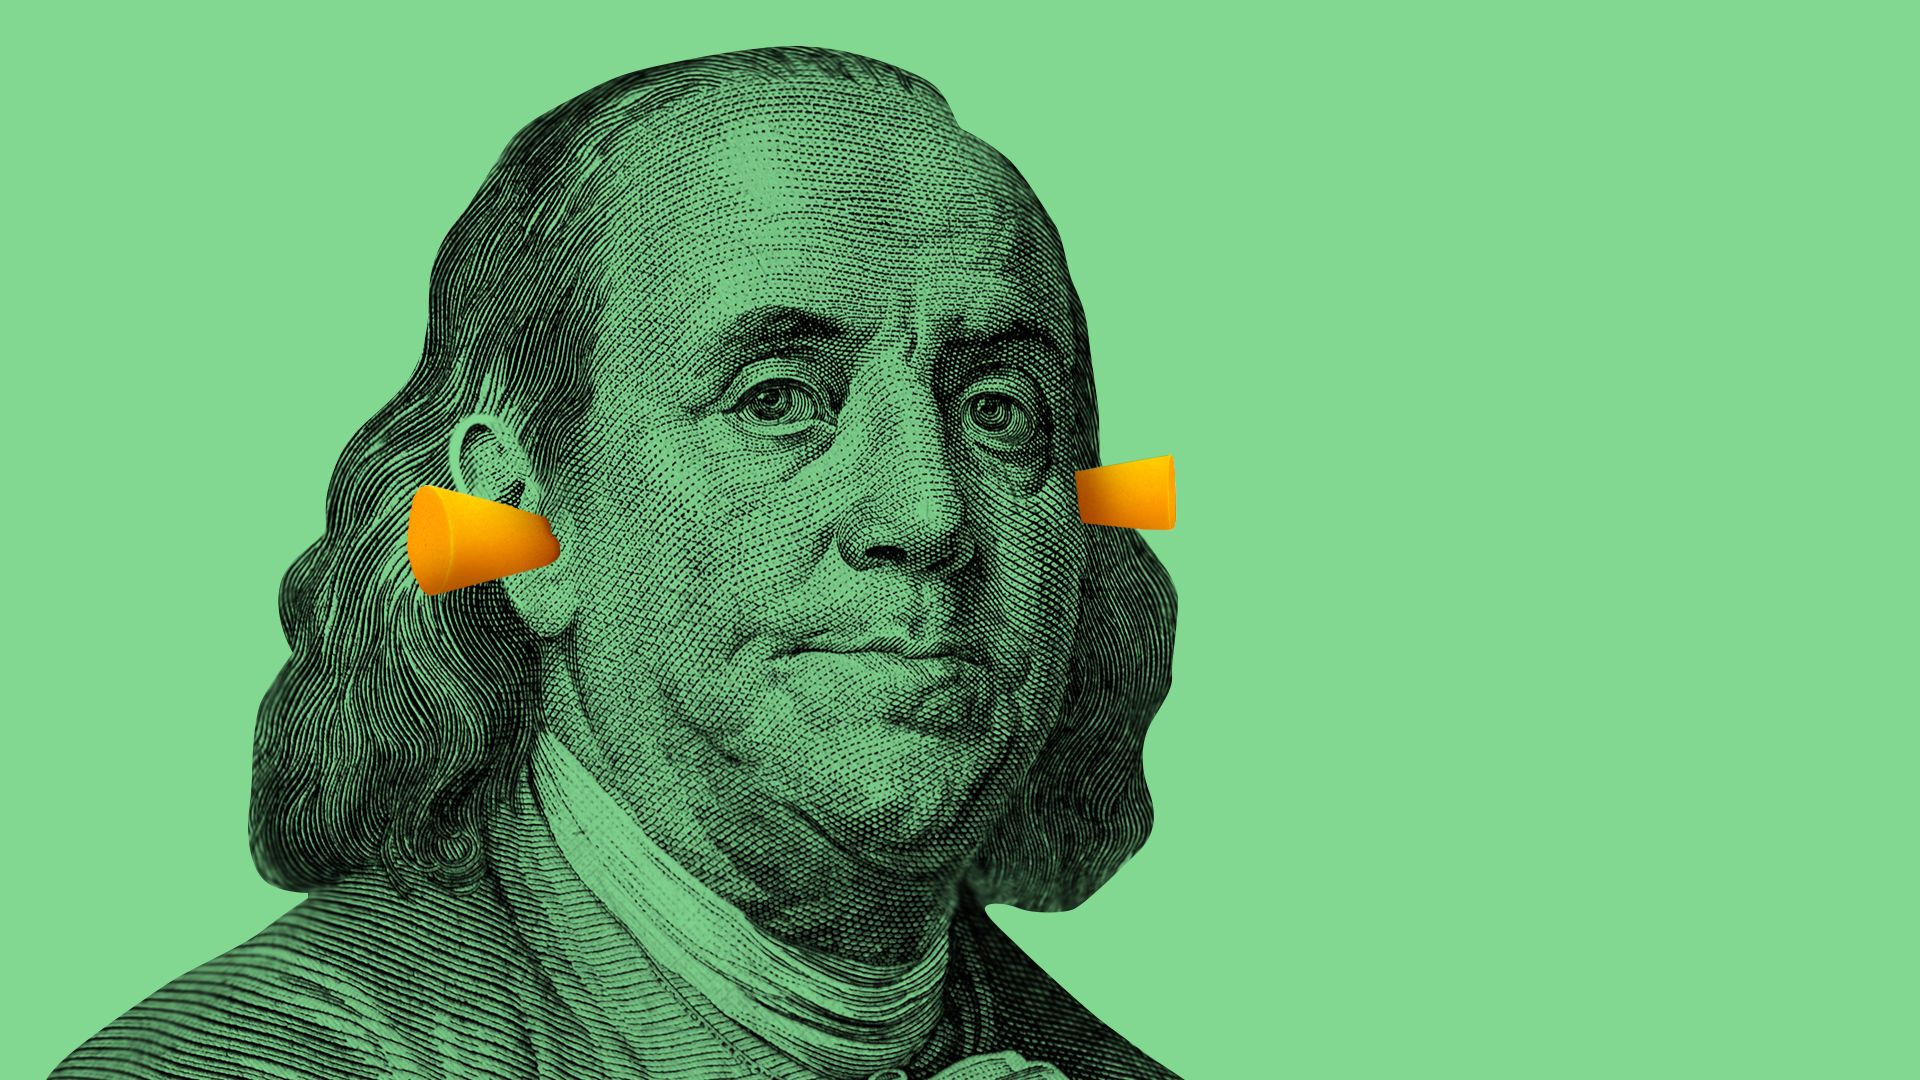 Ben Franklin with ear plugs.